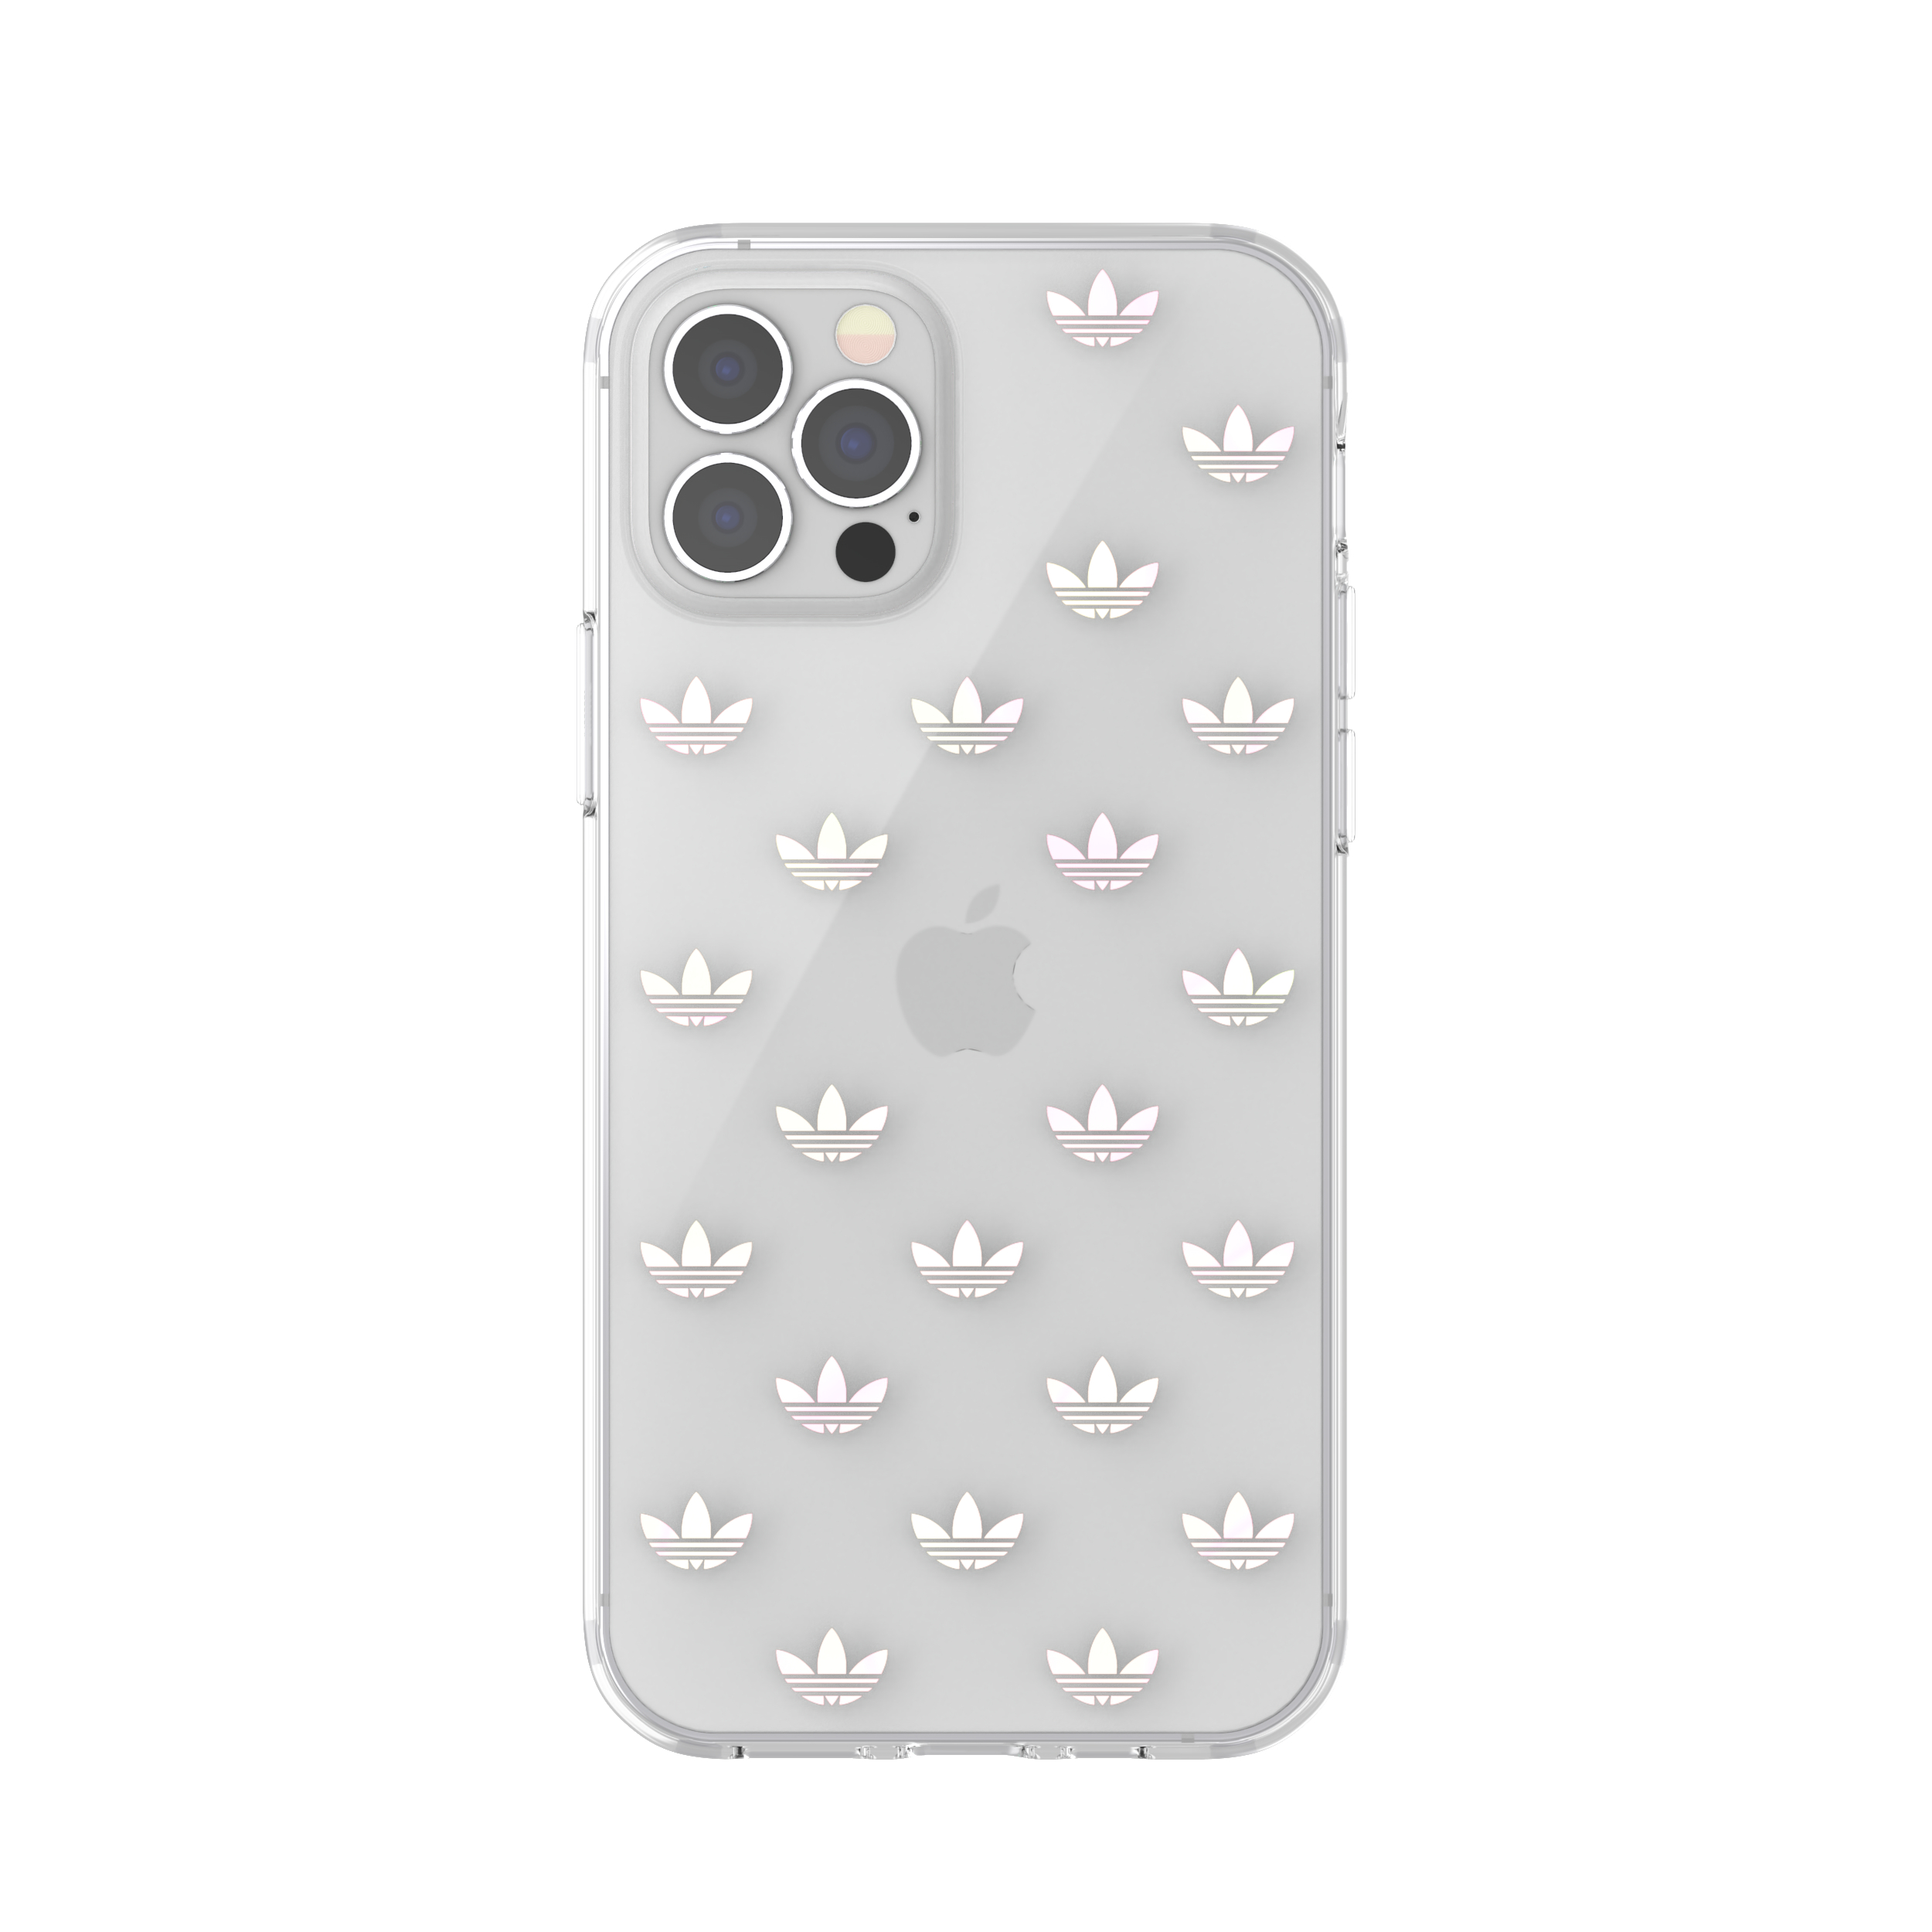 iPhone 12 Case ORIGINALS 42368, Silber Pro, iPhone Apple, Backcover, 12, ENTRY ADIDAS Snap